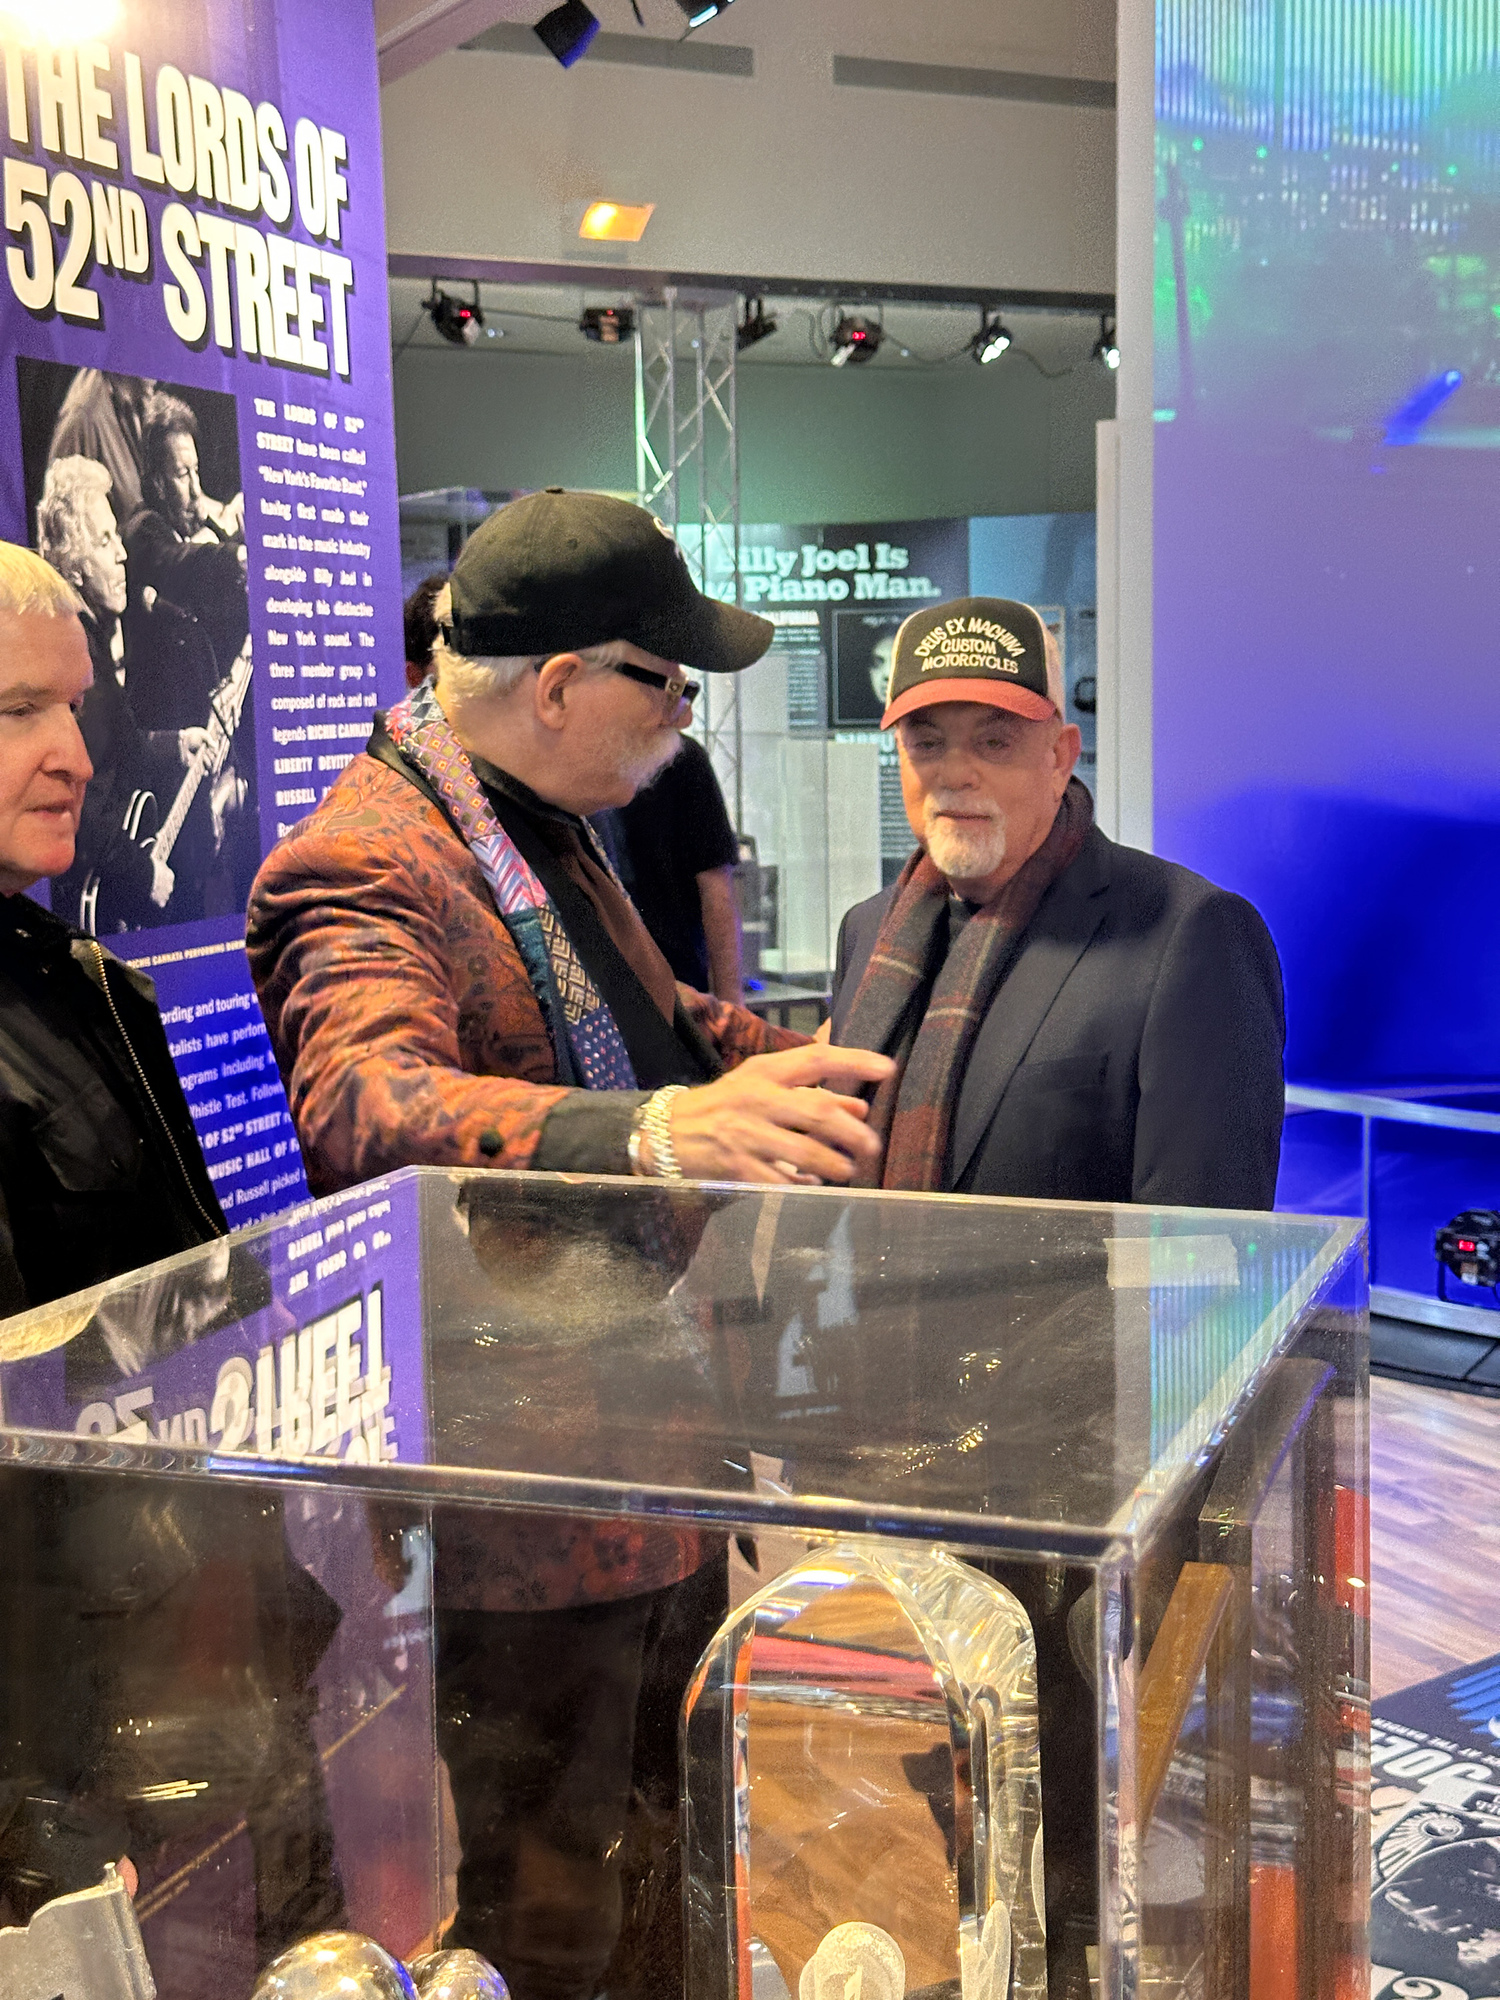 This past fall, Billy Joel visited the new exhibition about his life and career at the Long Island Music & Entertainment Hall of Fame in Stony Brook. MYRNA SUAREZ @myrnasuarezphoto